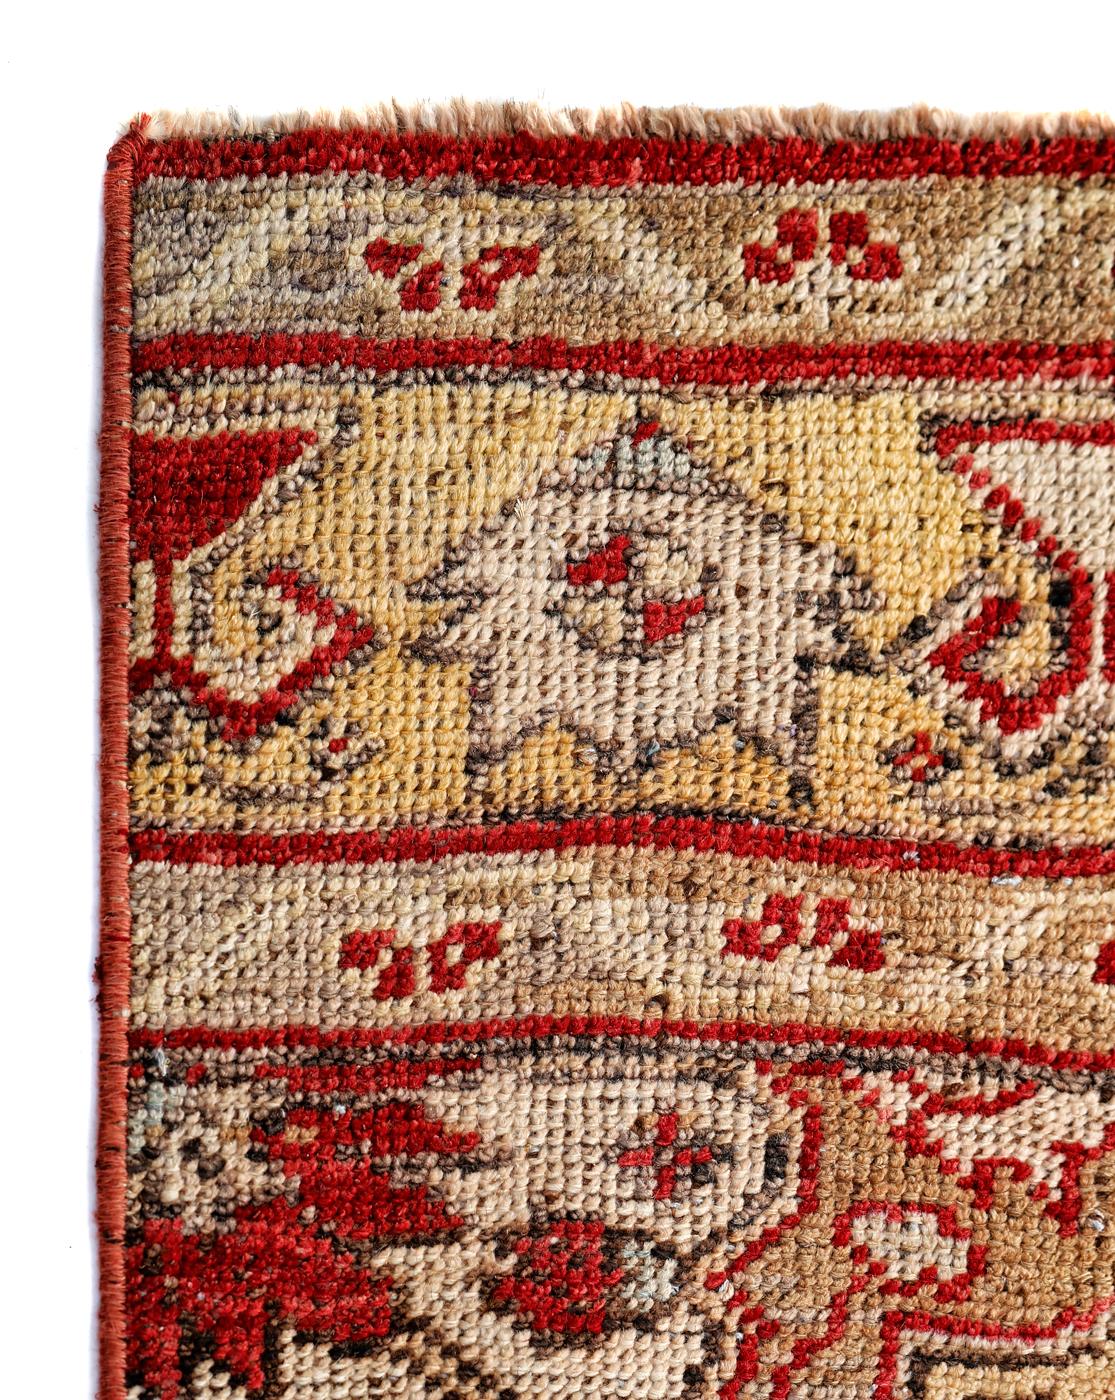 Anatolian rugs are hand knotted in the Central Anatolia or Asia Minor region of Turkey. The patterns are from ottoman era as well as modern Turkey. The central medallion used in this rug symbolizes the central authority of the ottoman sultans. In